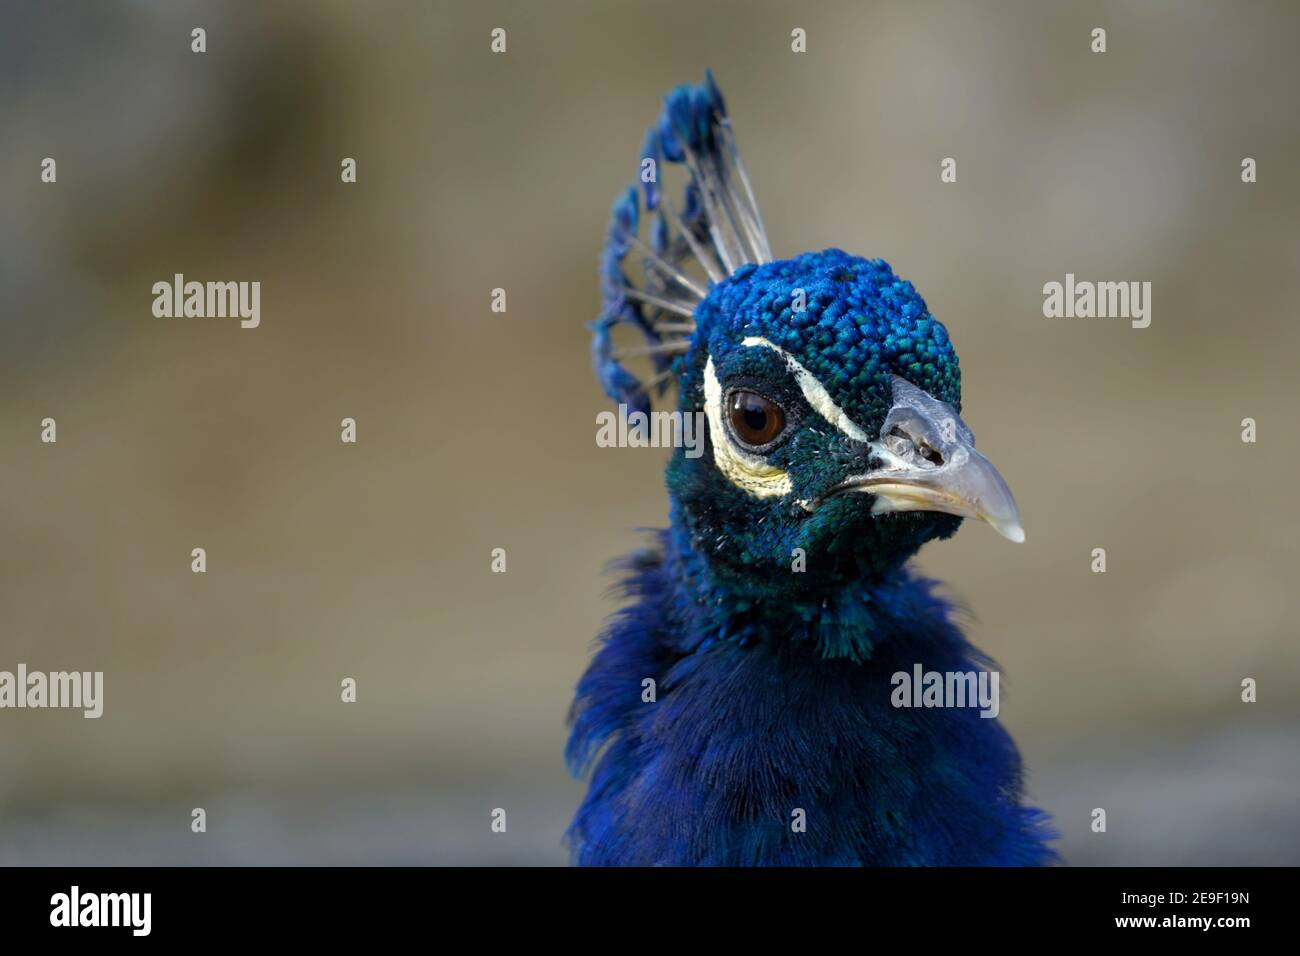 Head of male peacock, called also Indian or common peafowl, in Latin Pavo cristatus. It is close-up view, the head is slightly turned to side. Stock Photo